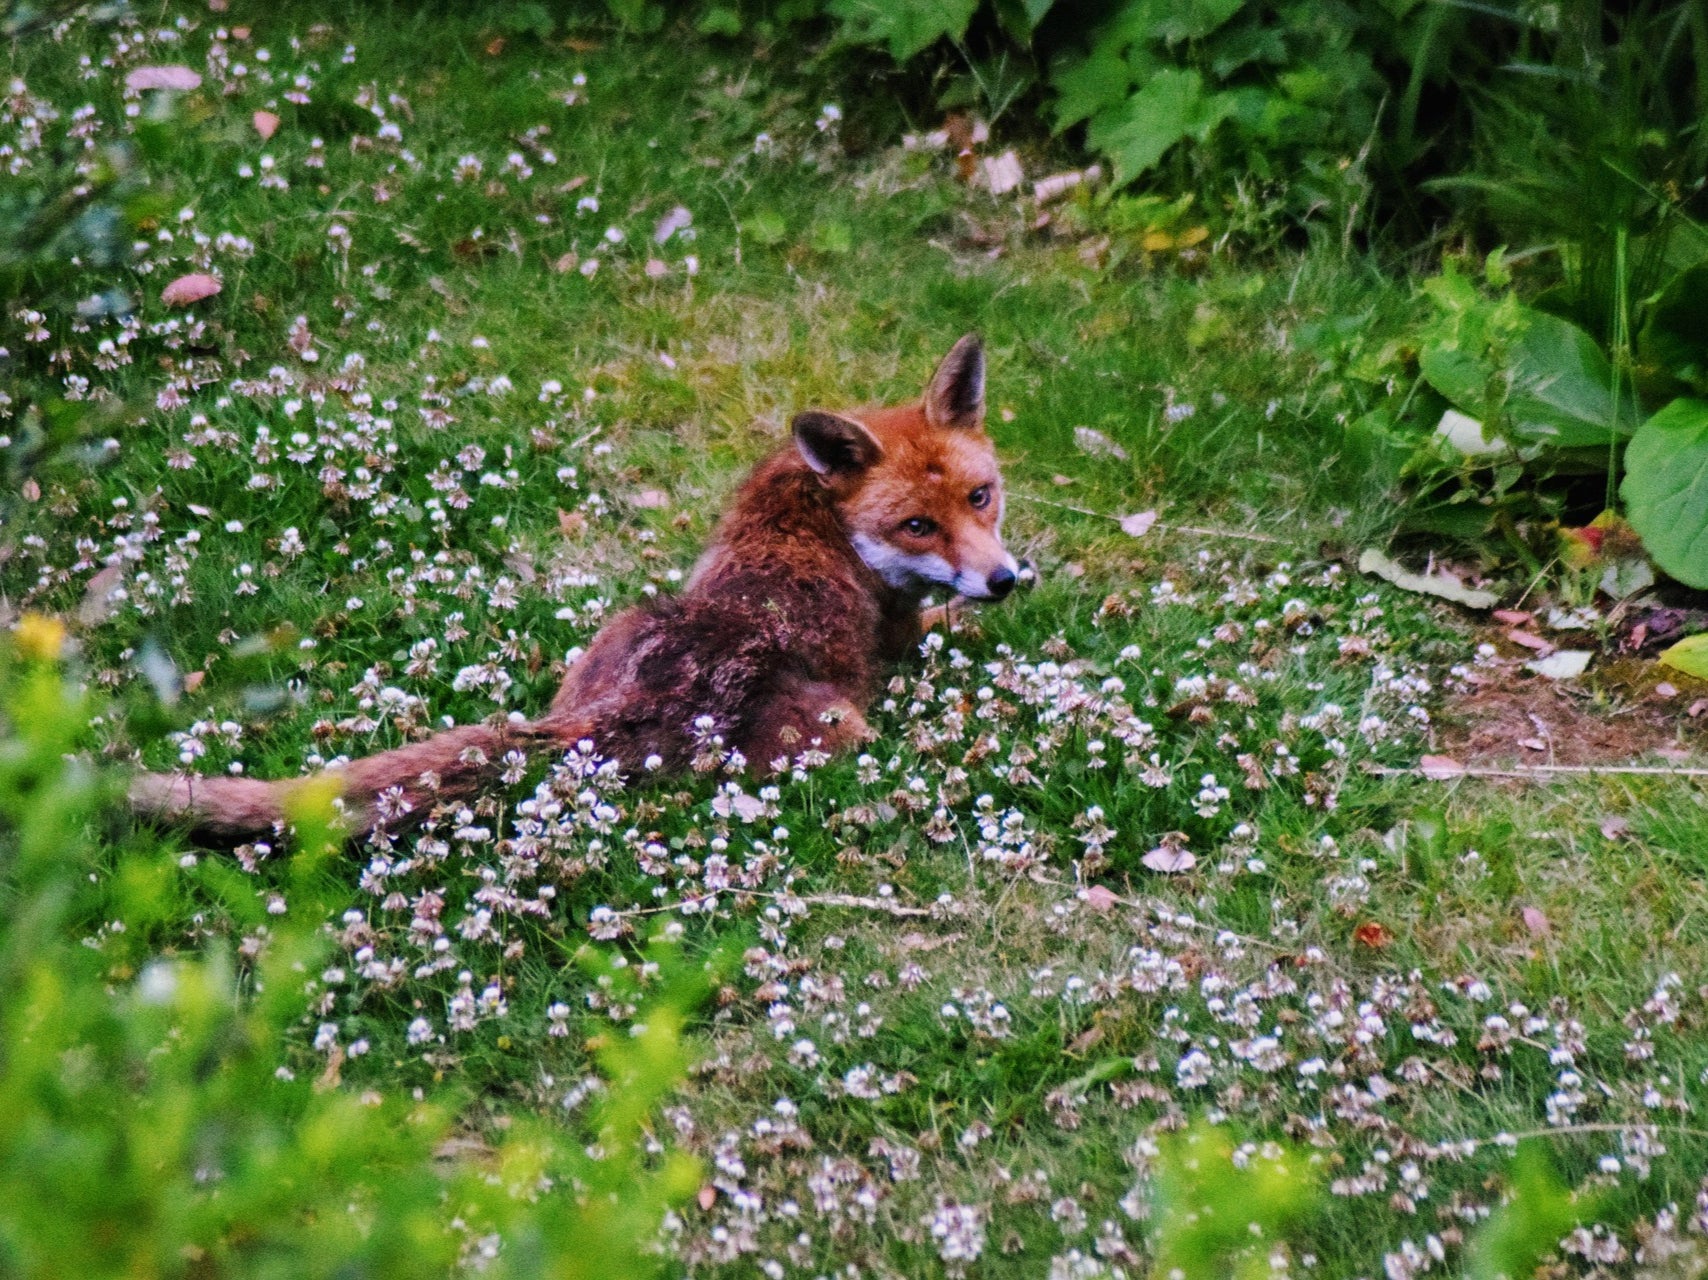 Three foxes in London have been shot with a crossbow